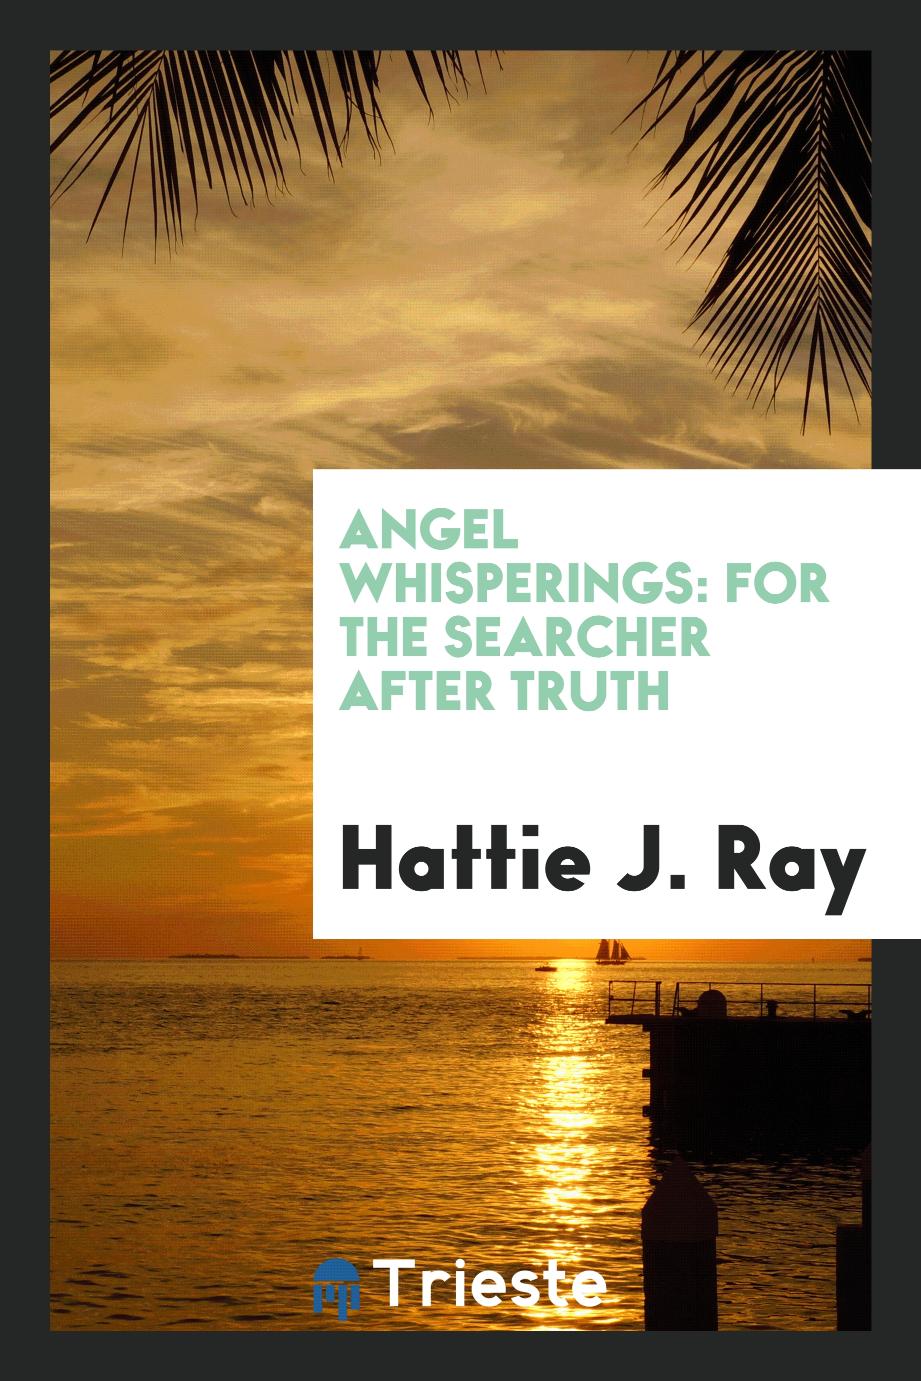 Angel Whisperings: For the Searcher After Truth